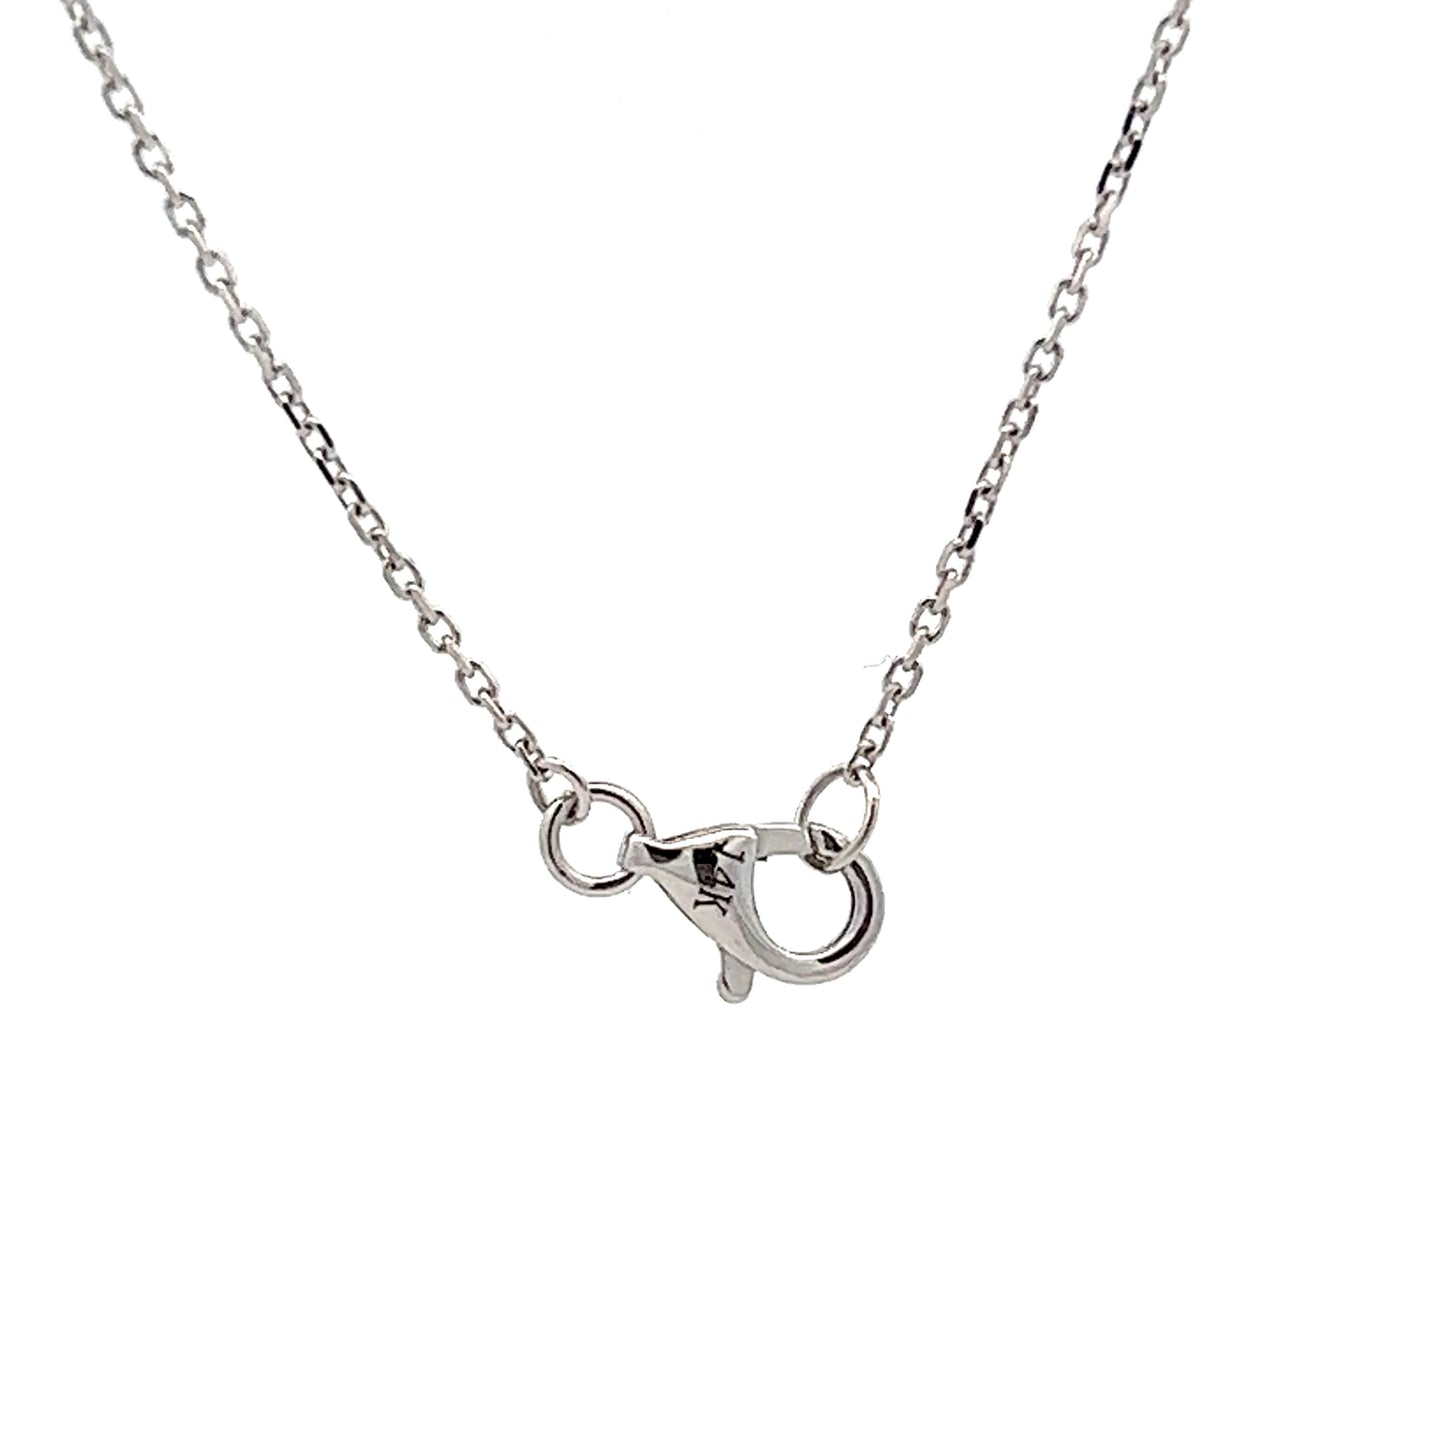 1.01 Diamond Pave Necklace in 14k White Gold